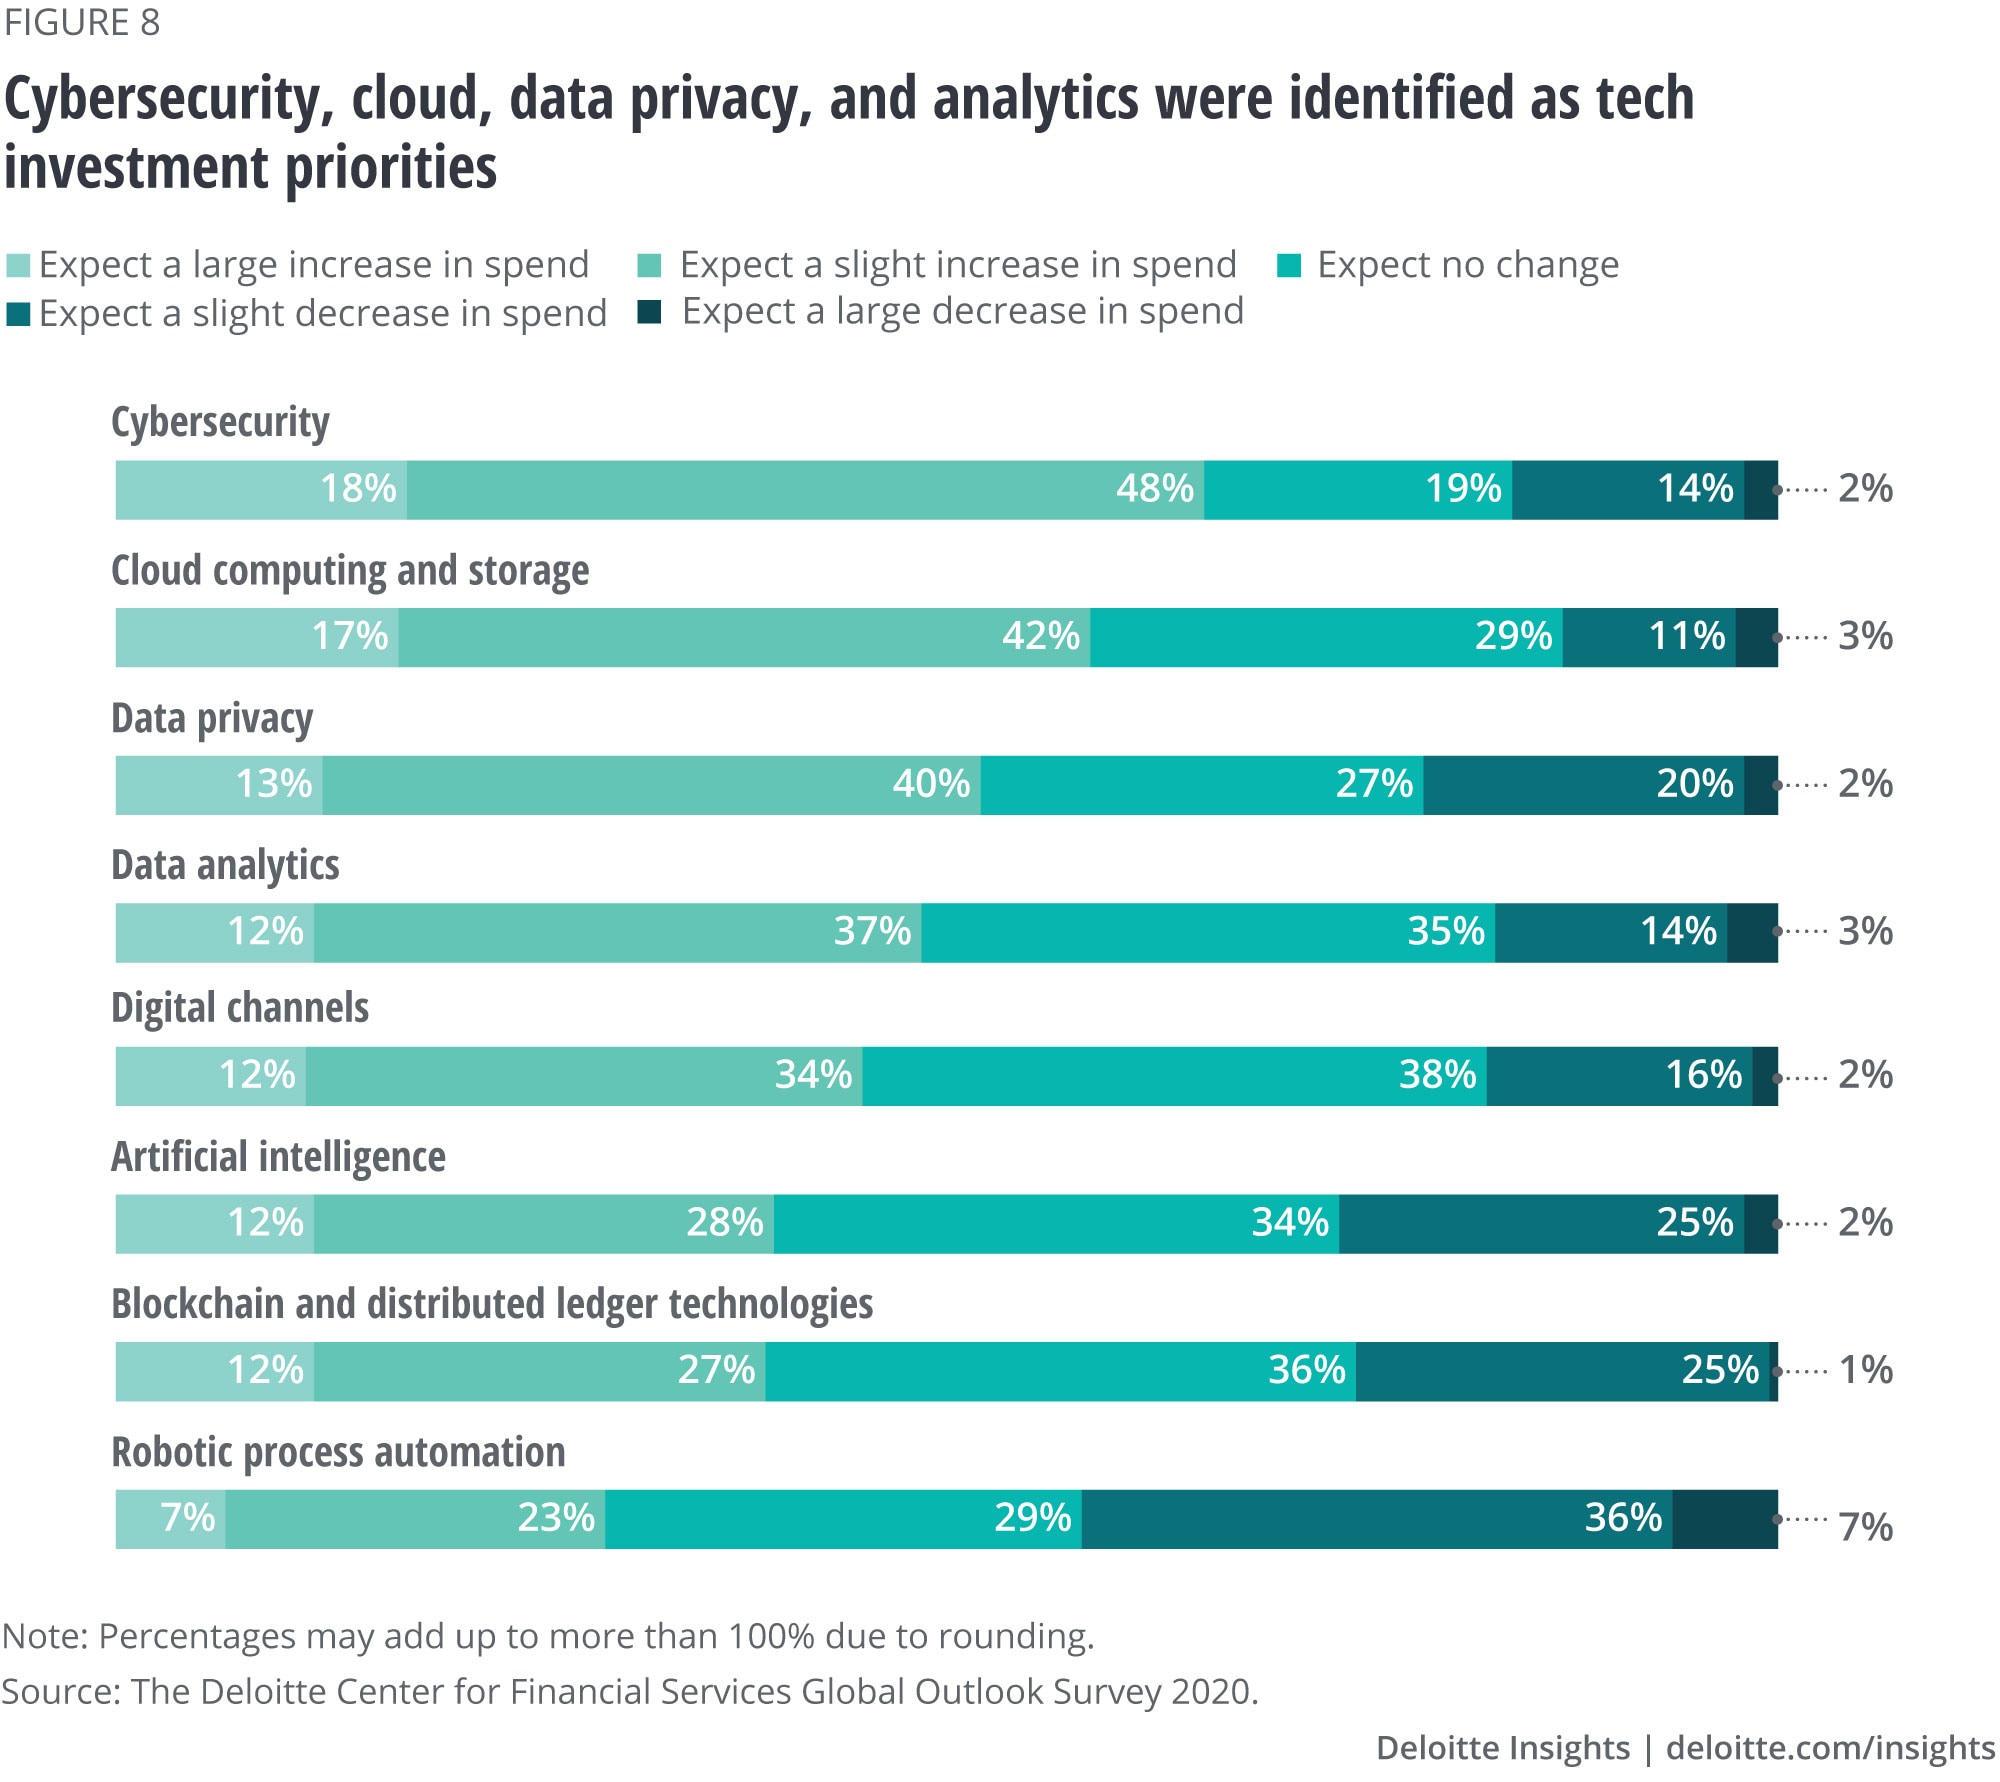 Cybersecurity, cloud, data privacy, and analytics were identified as tech investment priorities